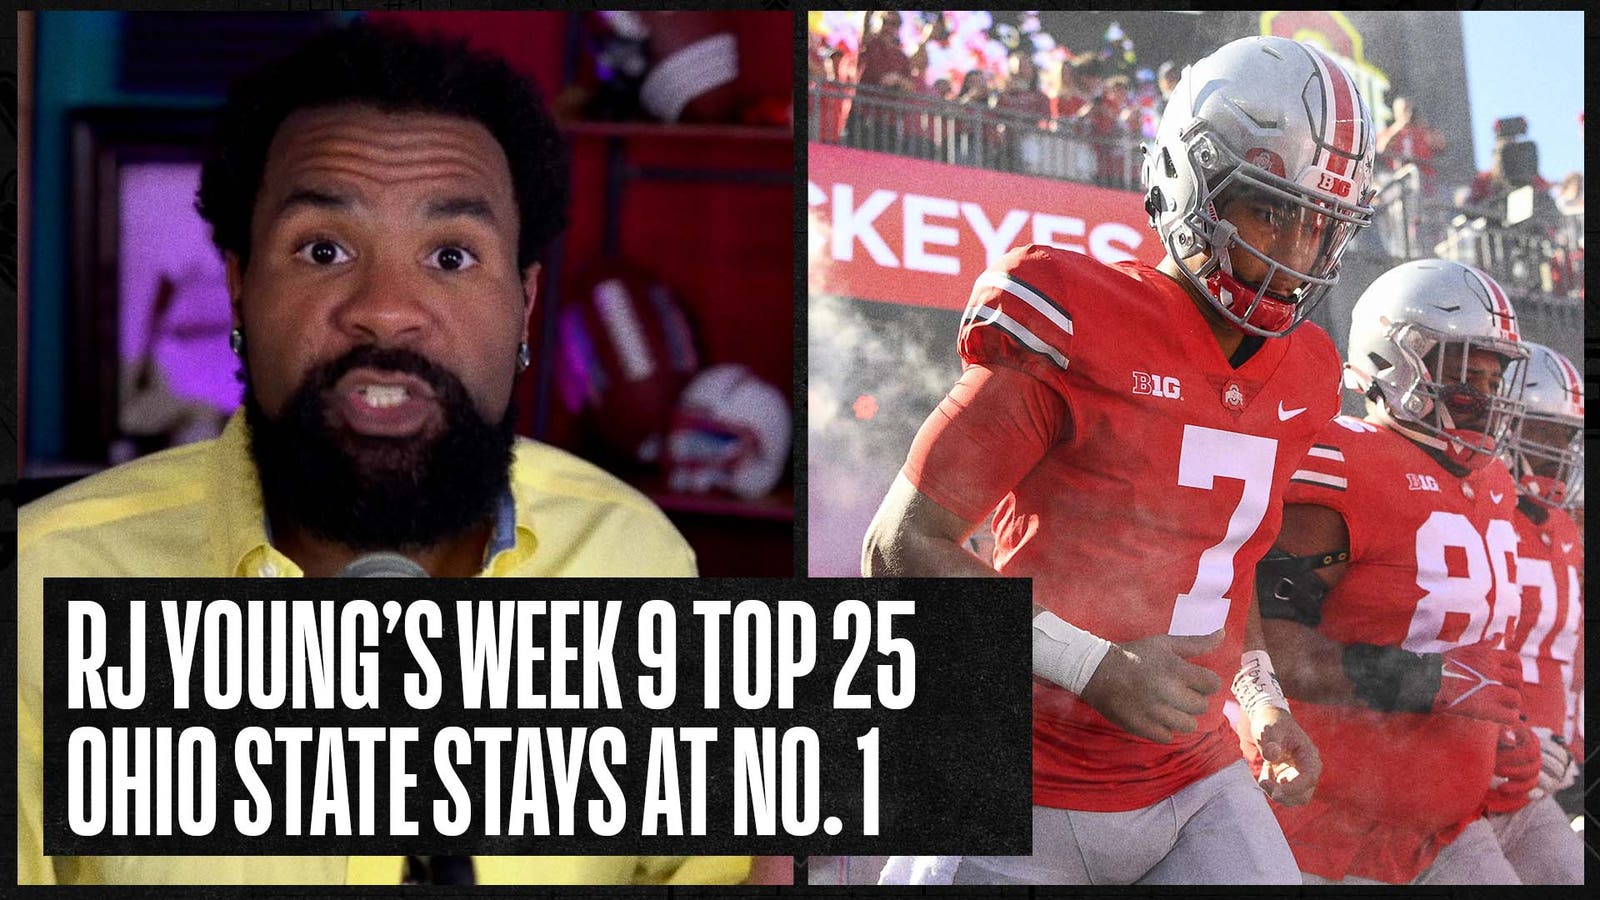 RJ Young's Week 9 Top 25: Ohio State stays at No. 1